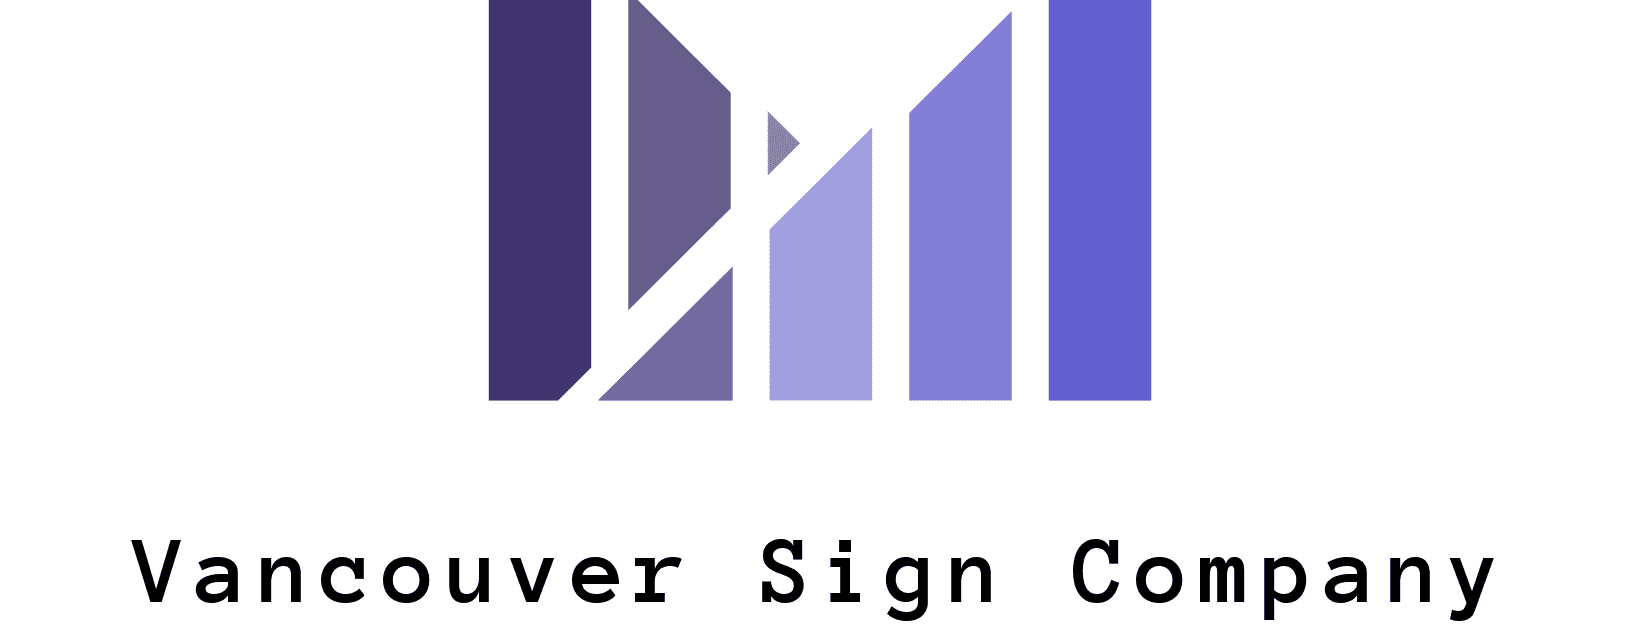 Vancouver Sign Company